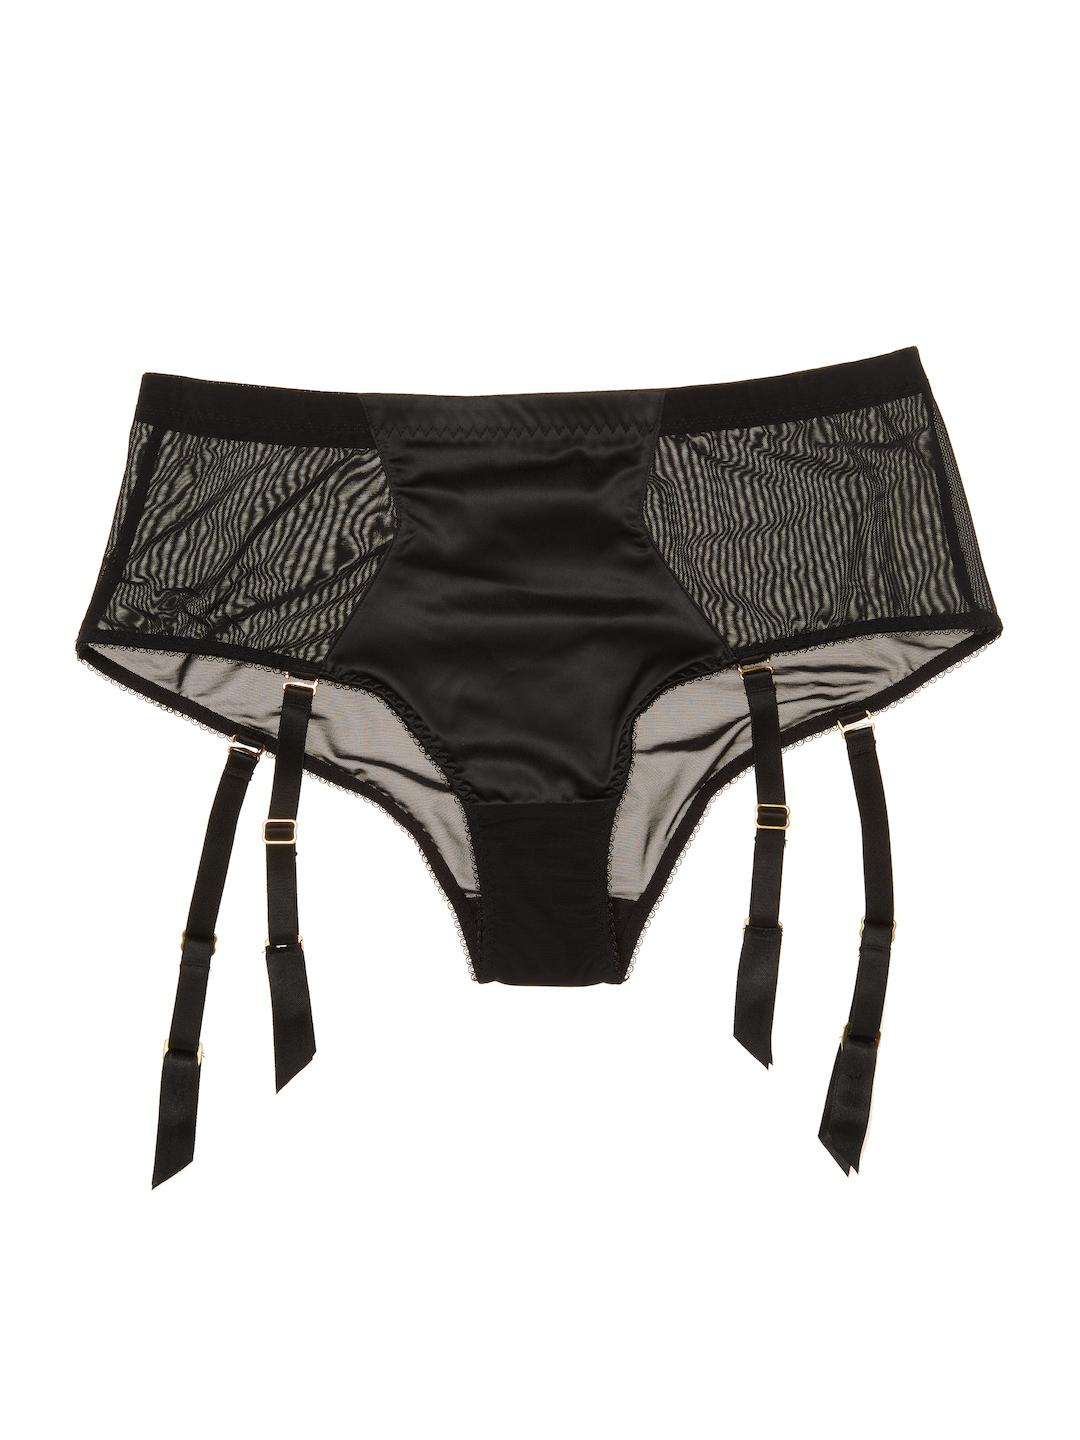 L'Agent by Agent Provocateur Synthetic Penelope Suspender Brief in Black -  Lyst